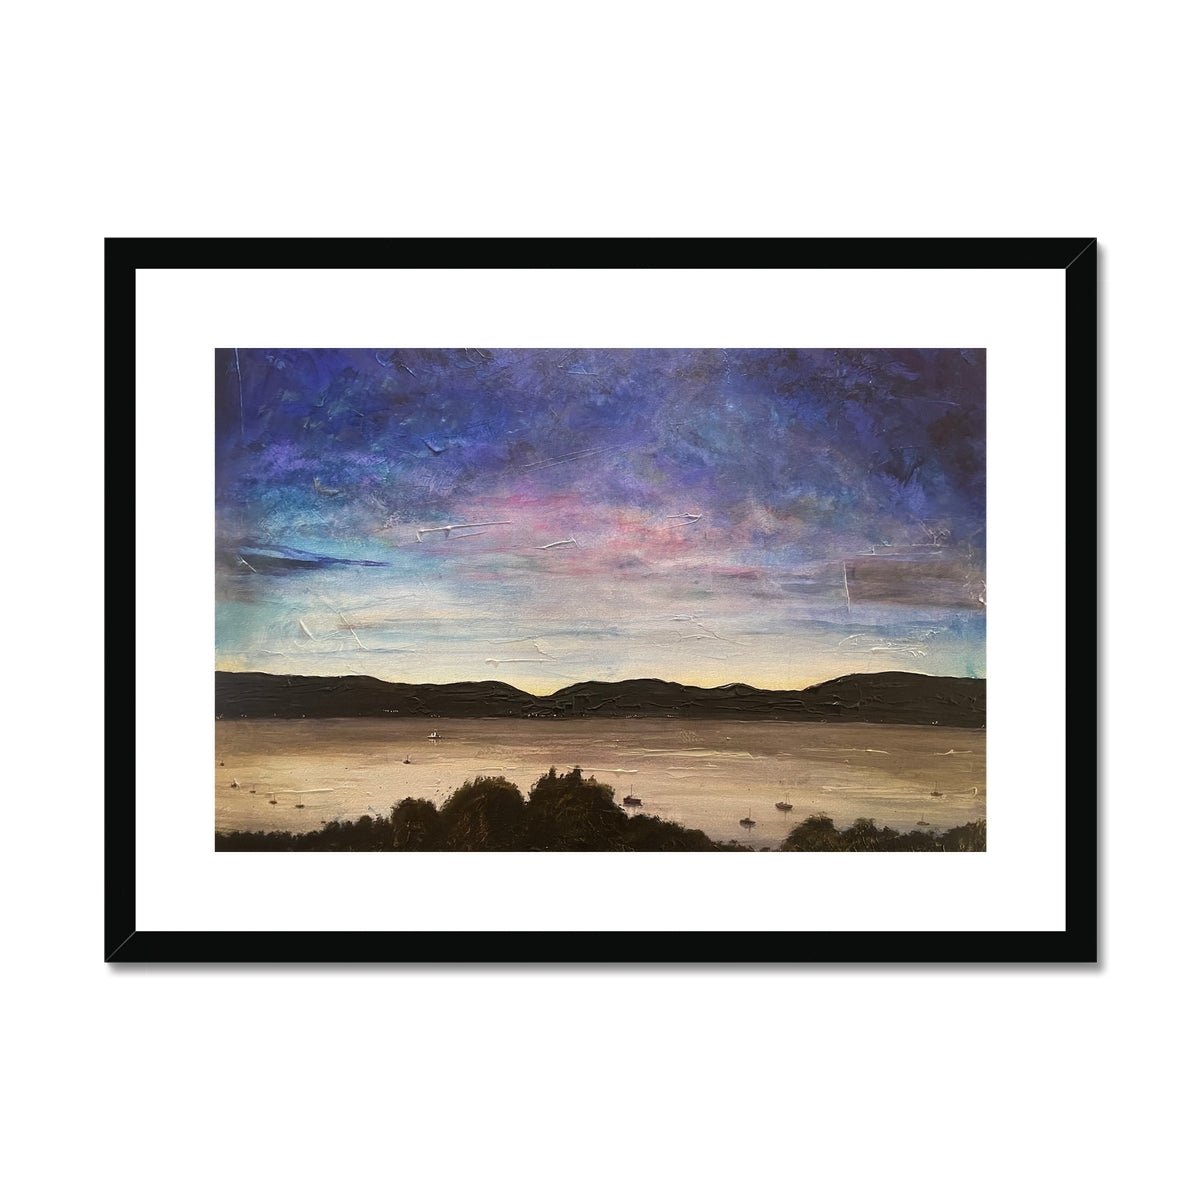 River Clyde Twilight Painting | Framed & Mounted Prints From Scotland-Framed & Mounted Prints-River Clyde Art Gallery-A2 Landscape-Black Frame-Paintings, Prints, Homeware, Art Gifts From Scotland By Scottish Artist Kevin Hunter